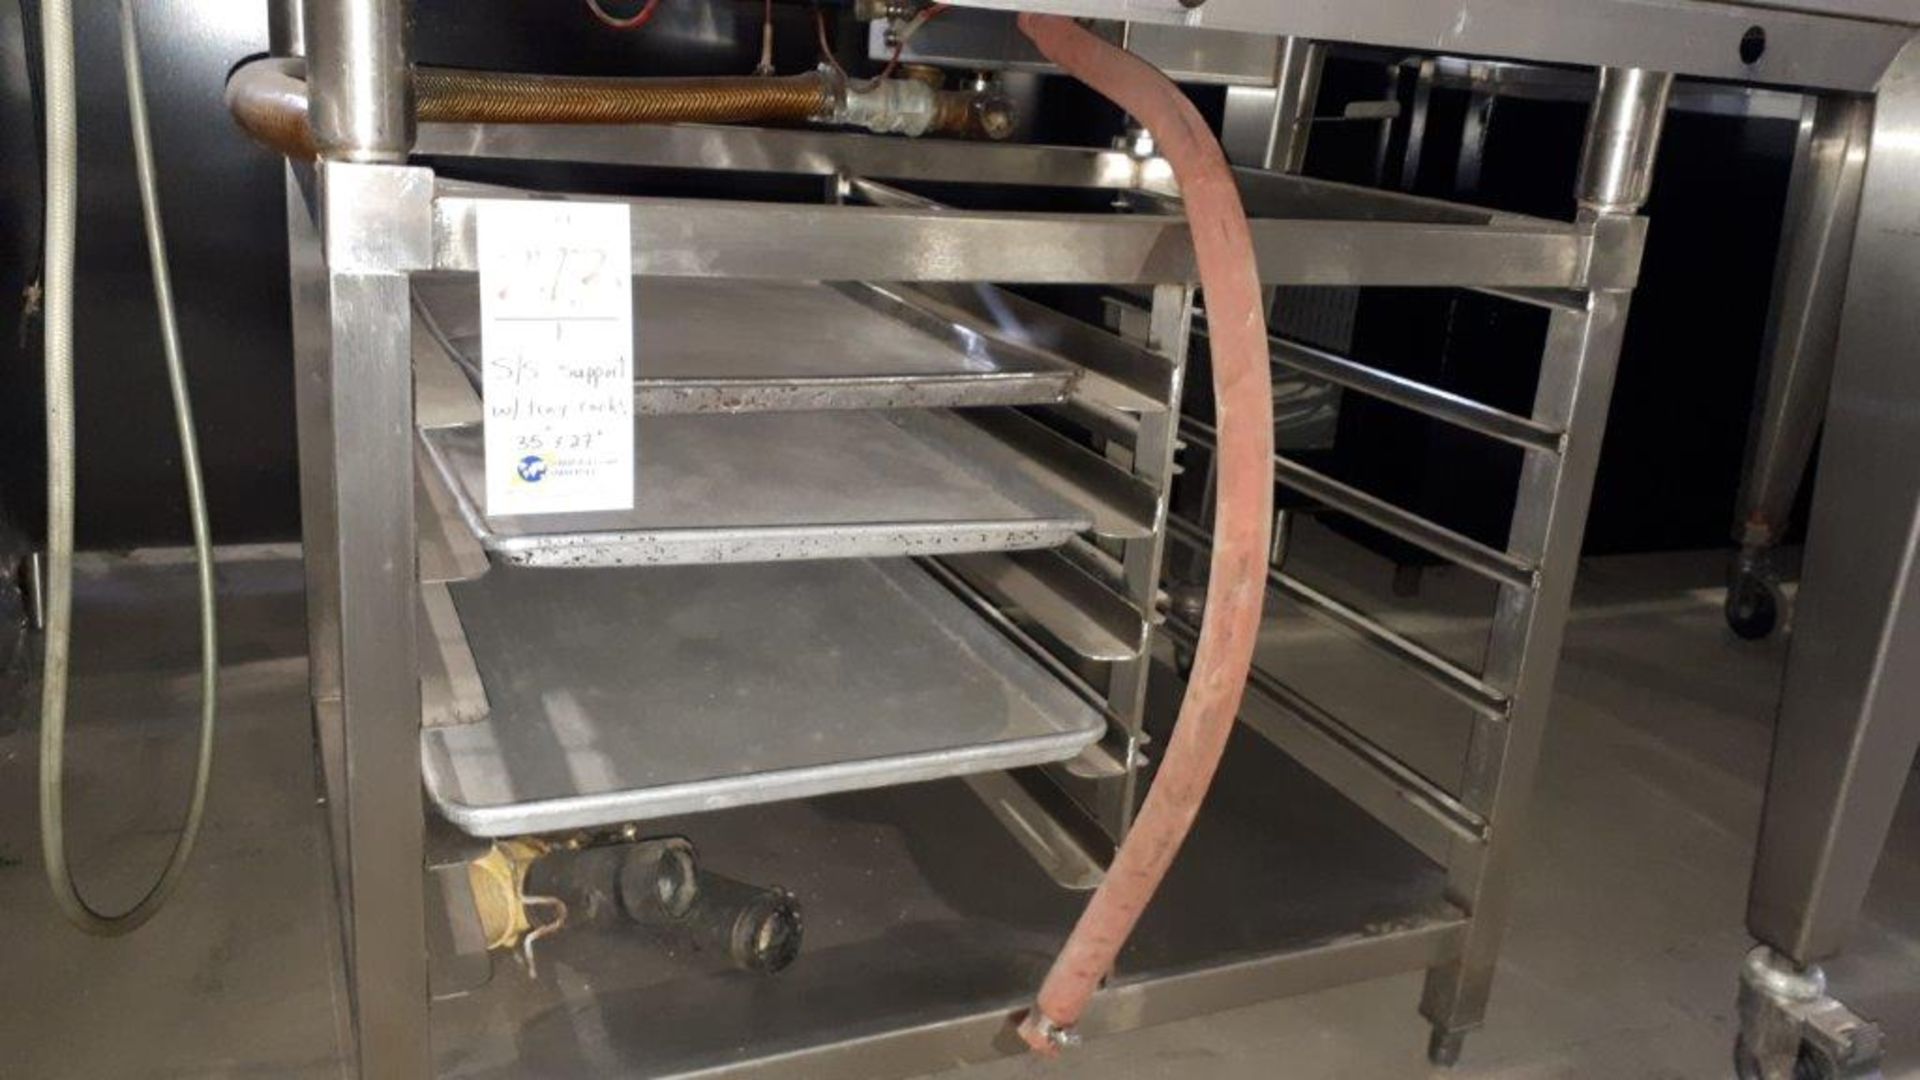 Stainless steel support w/trays racks 35"x27"